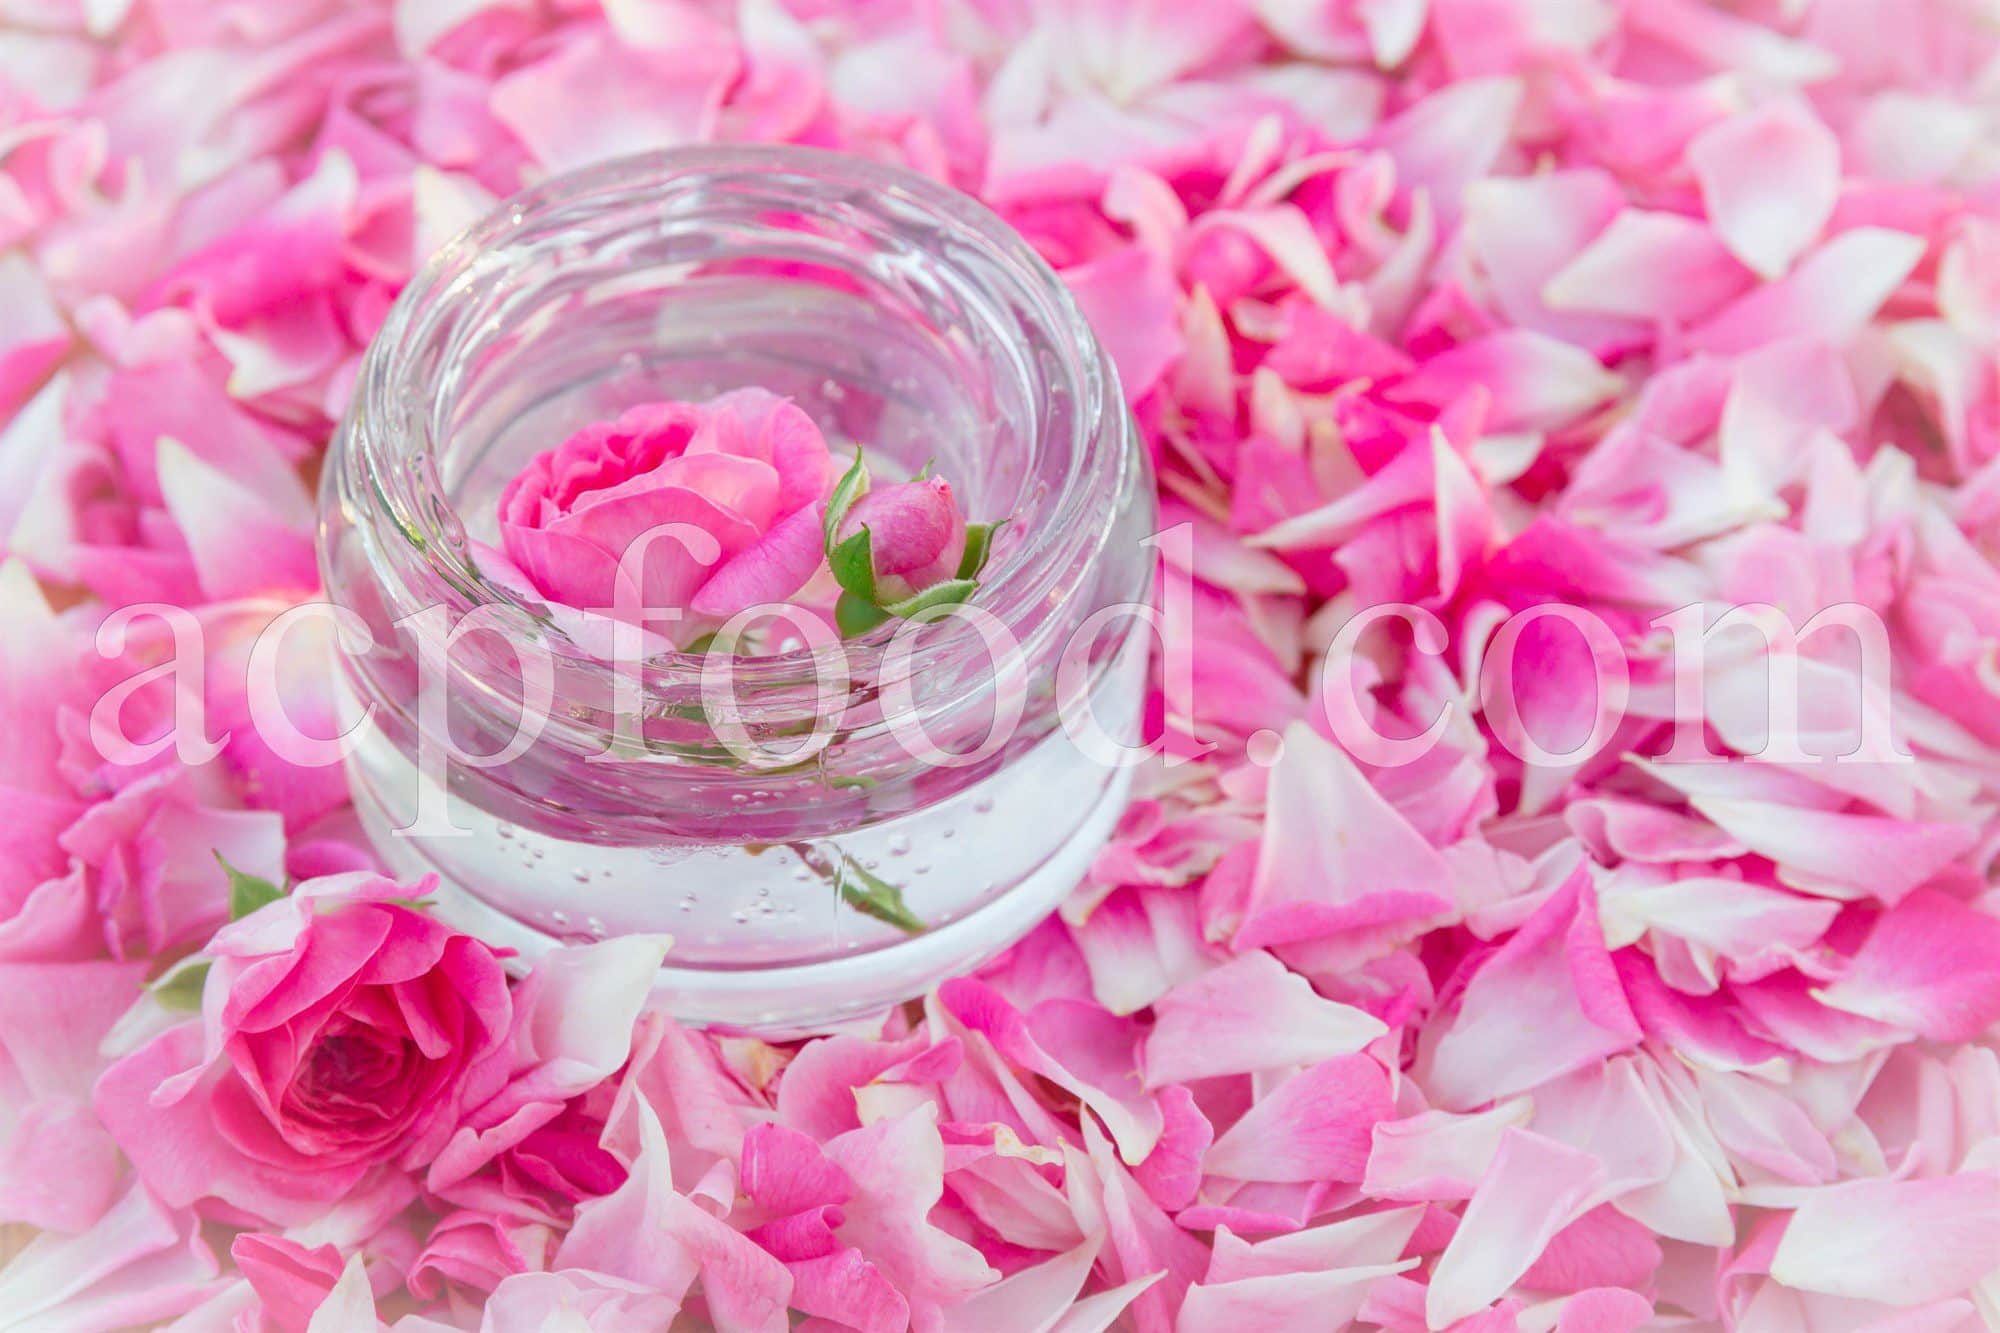 Herbs and fruits which can brighten you up. Rose Water